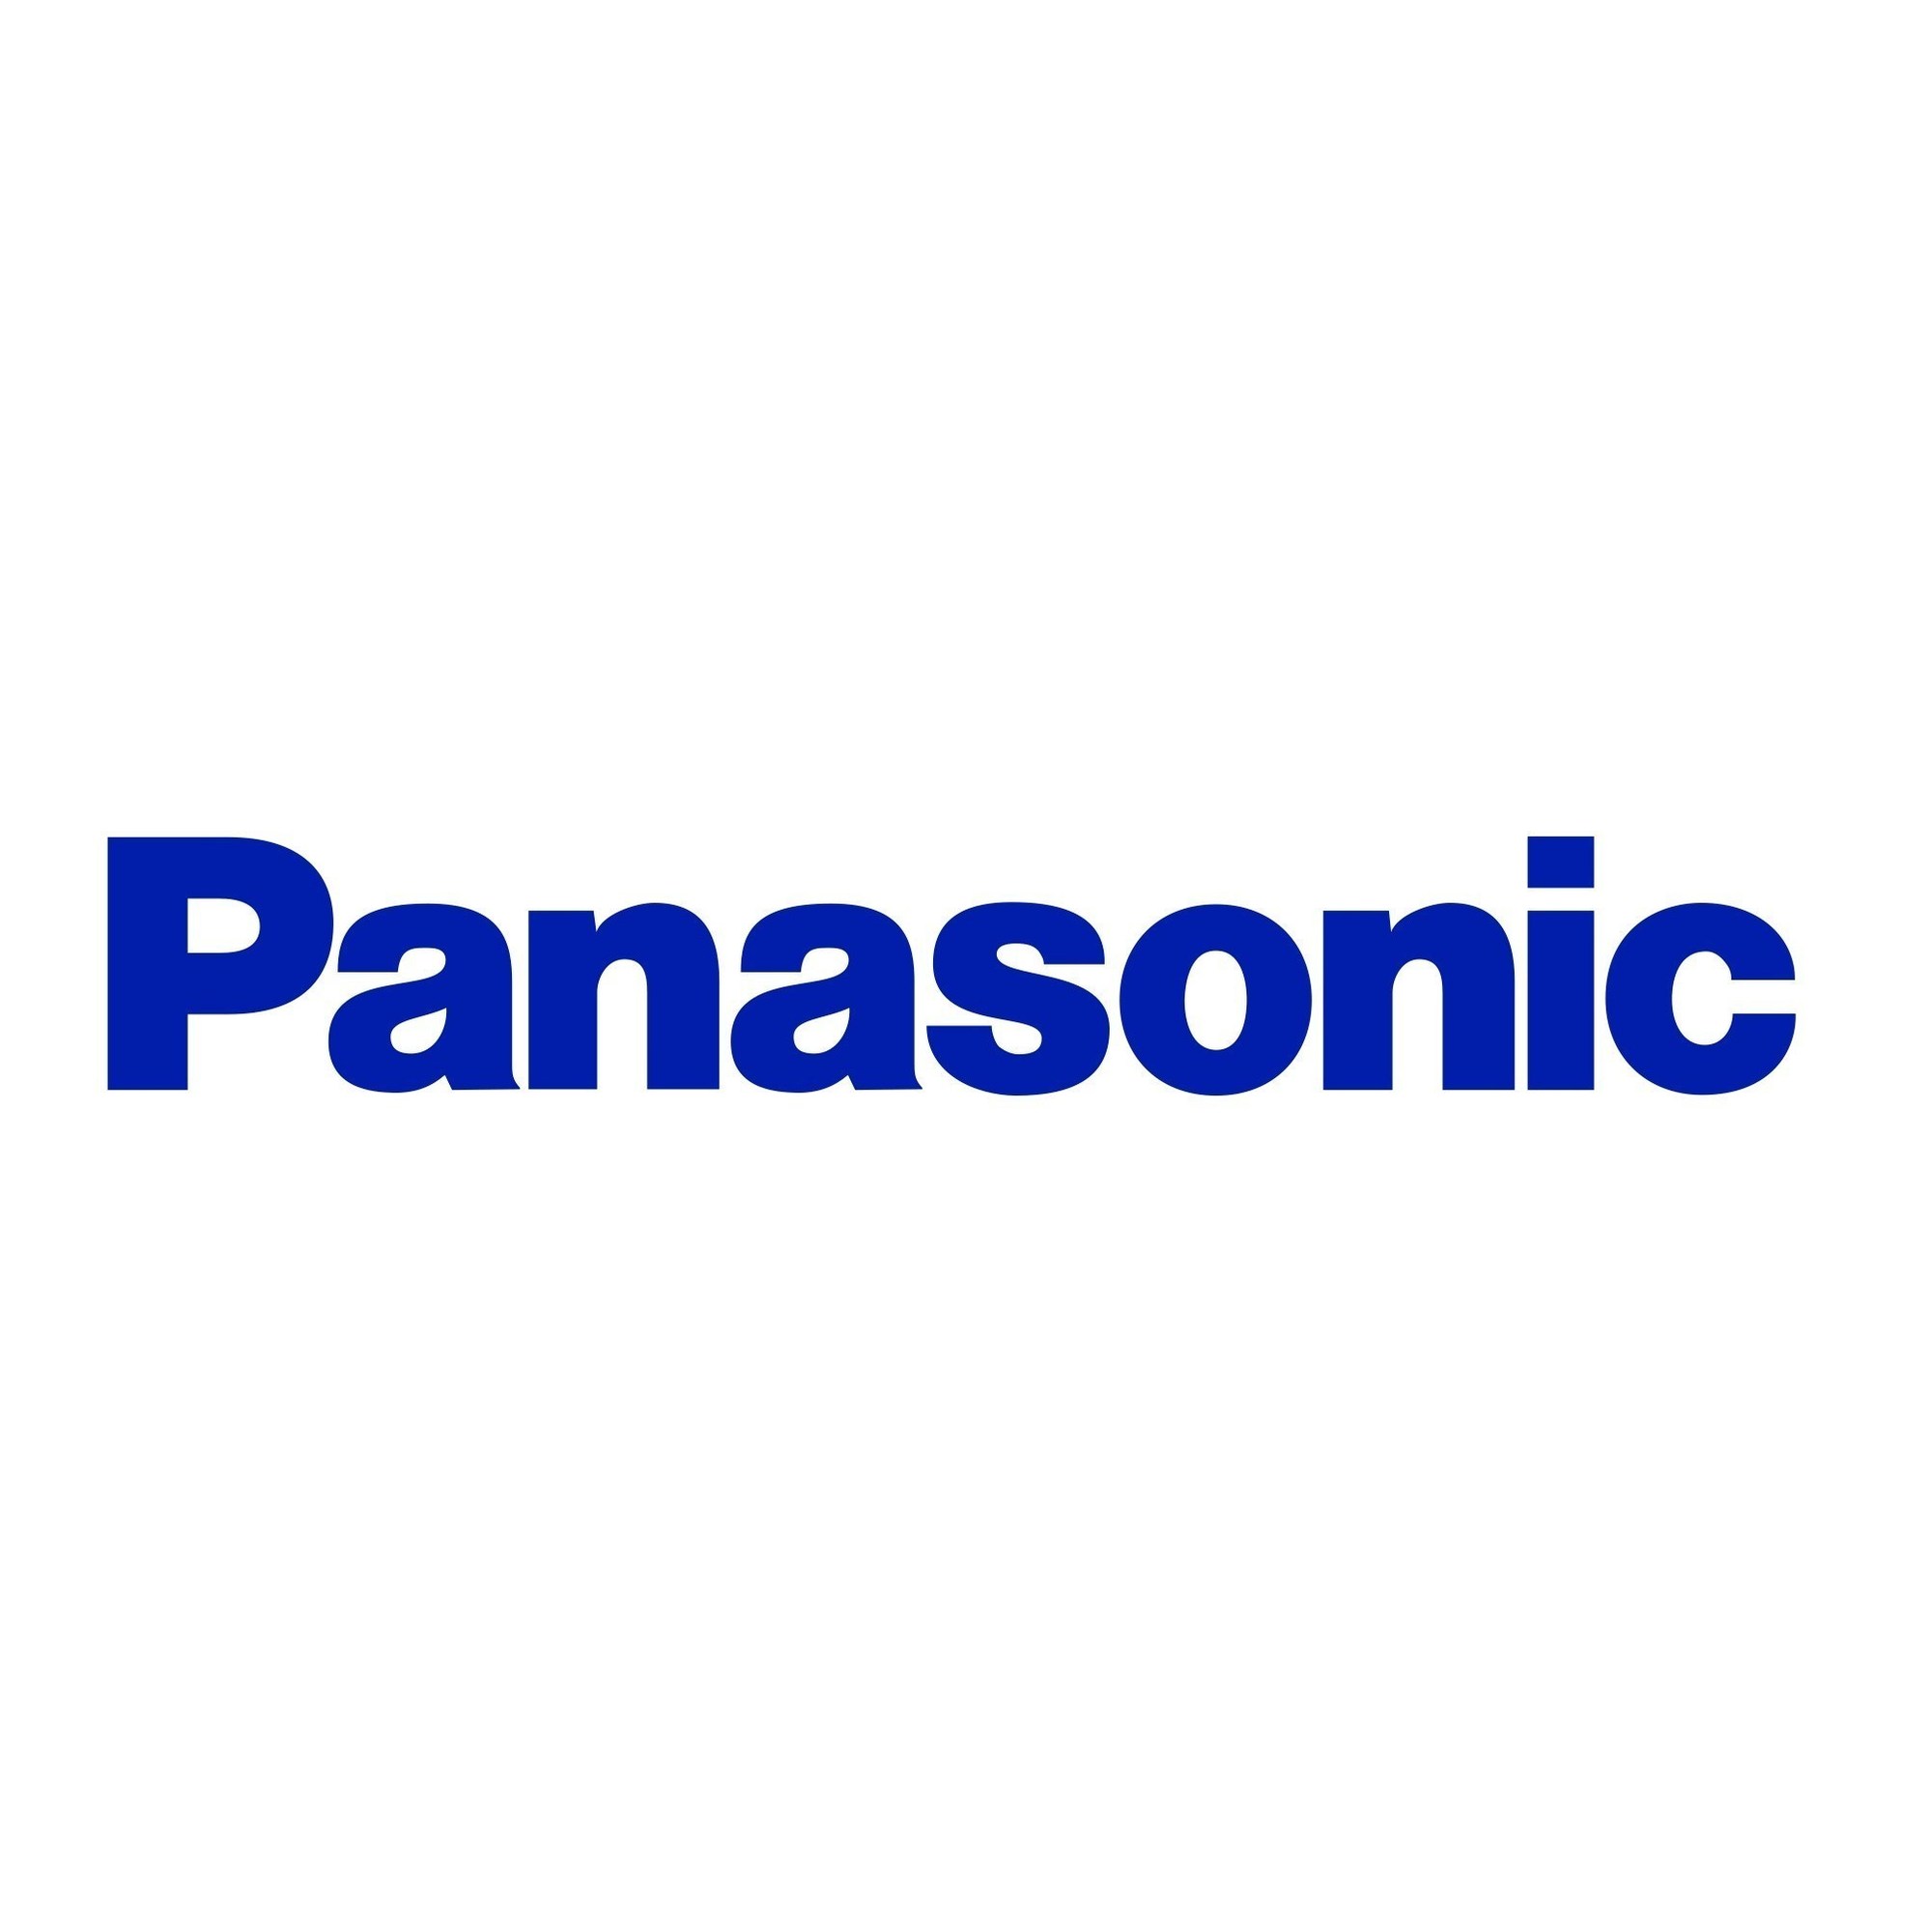 Panasonic Solar and Enphase Energy Announce Availability Date of High-Efficiency AC Modules